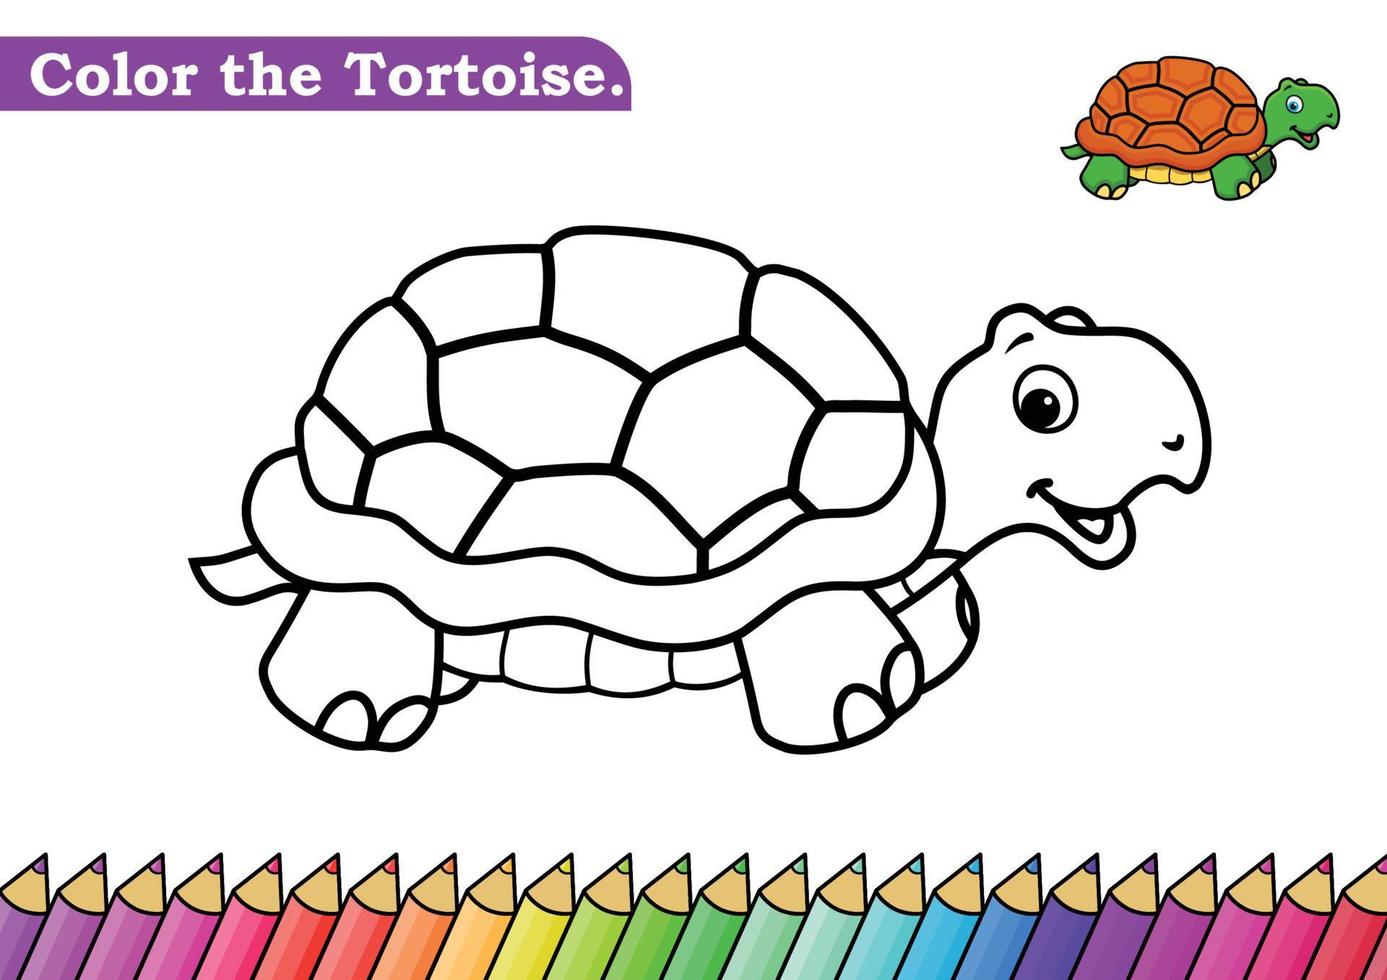 Coloring page for Tortoise vector illustration.  Kindergarten children Coloring pages activity worksheet with cute smile Tortoise cartoon.  Tortoise isolated on white background for color books.